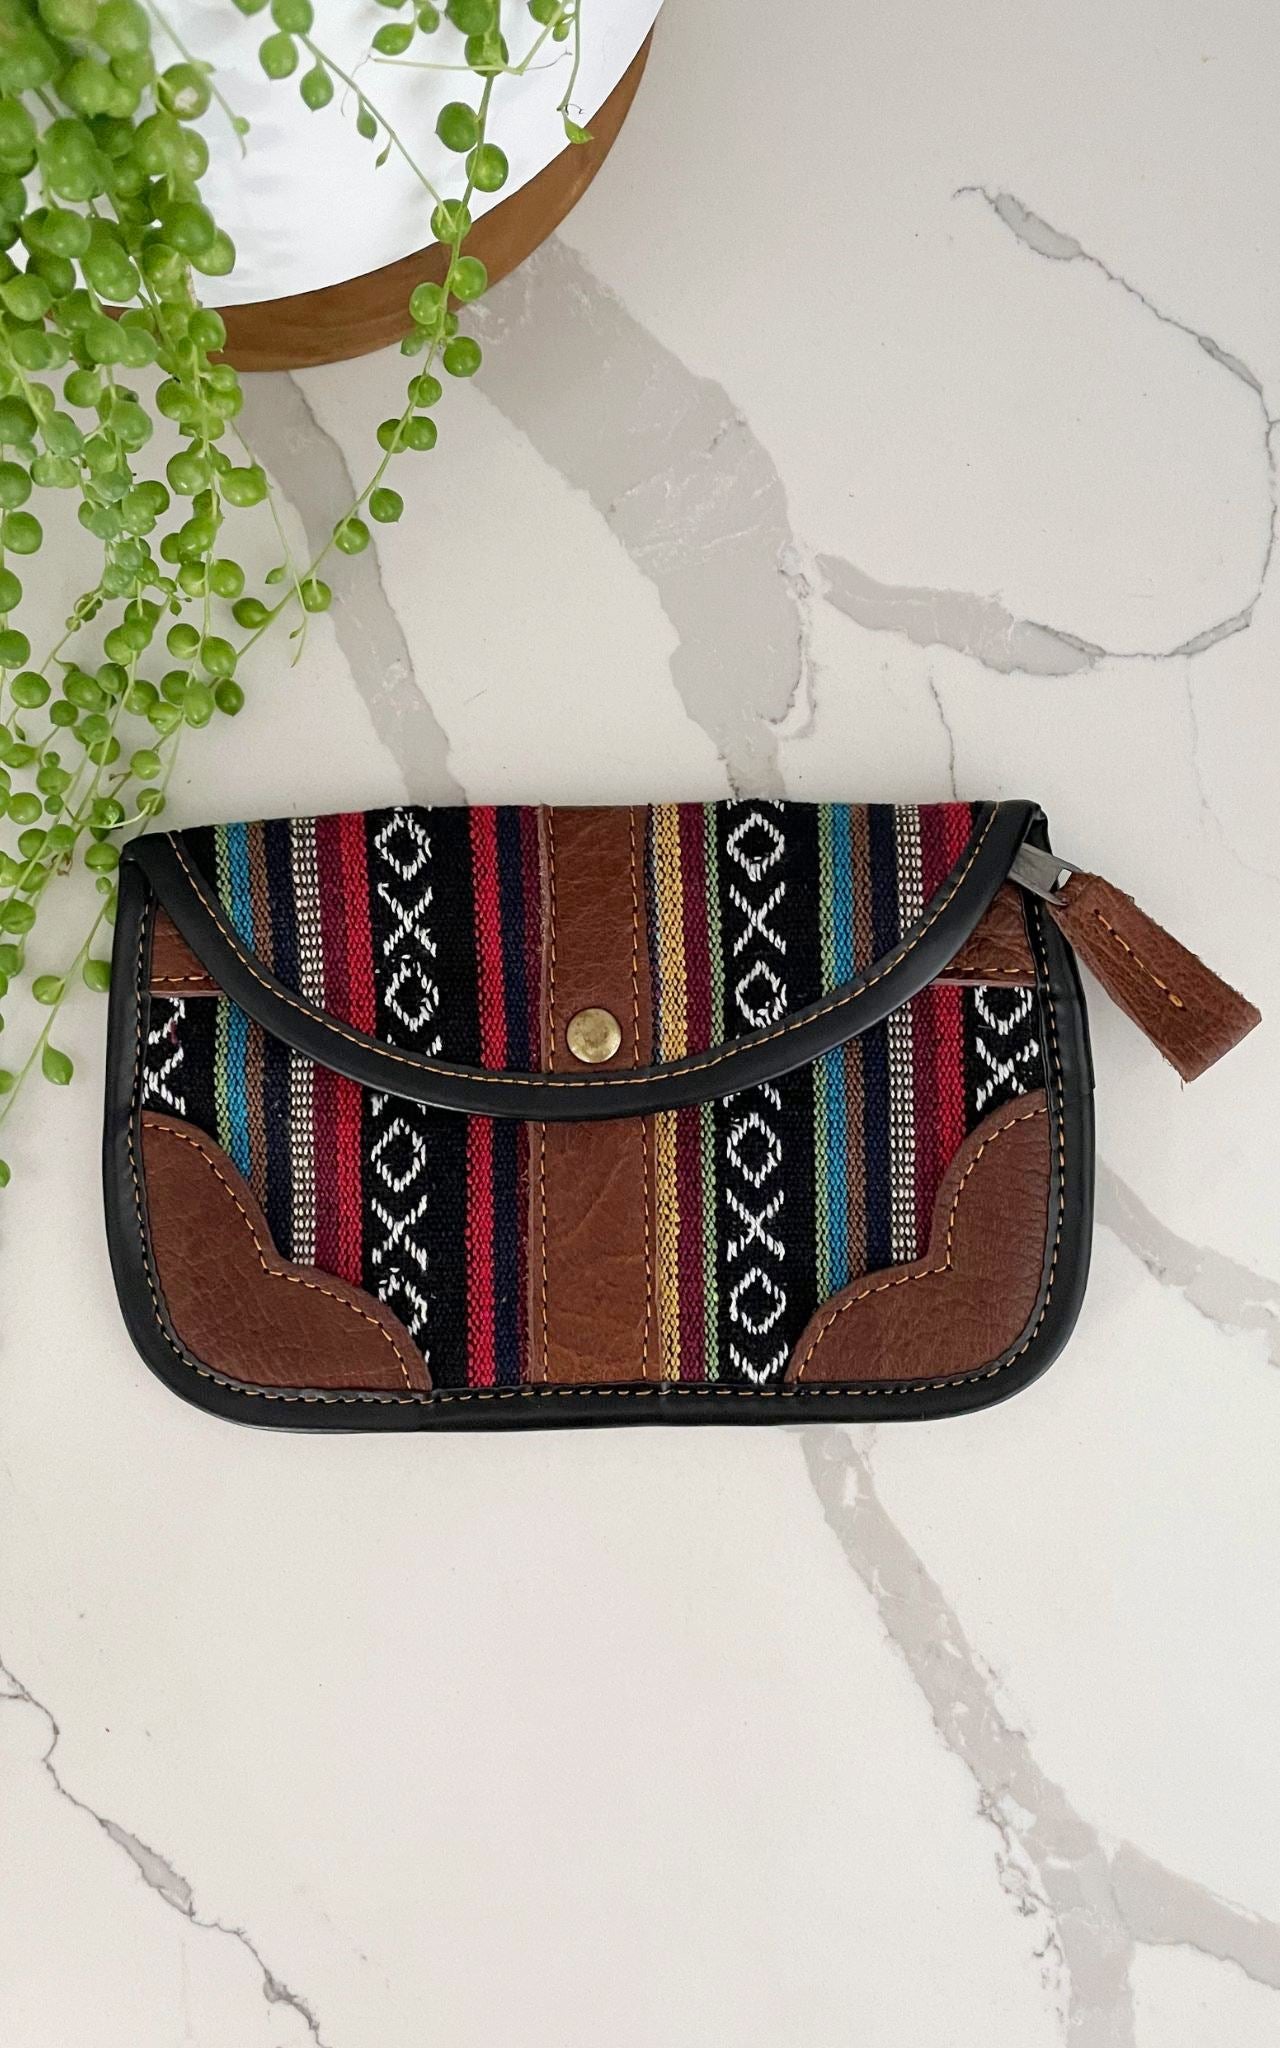 Surya Australia Ethical Buffalo Leather + Woven Cotton Clutch Wallets from Nepal - Drinth